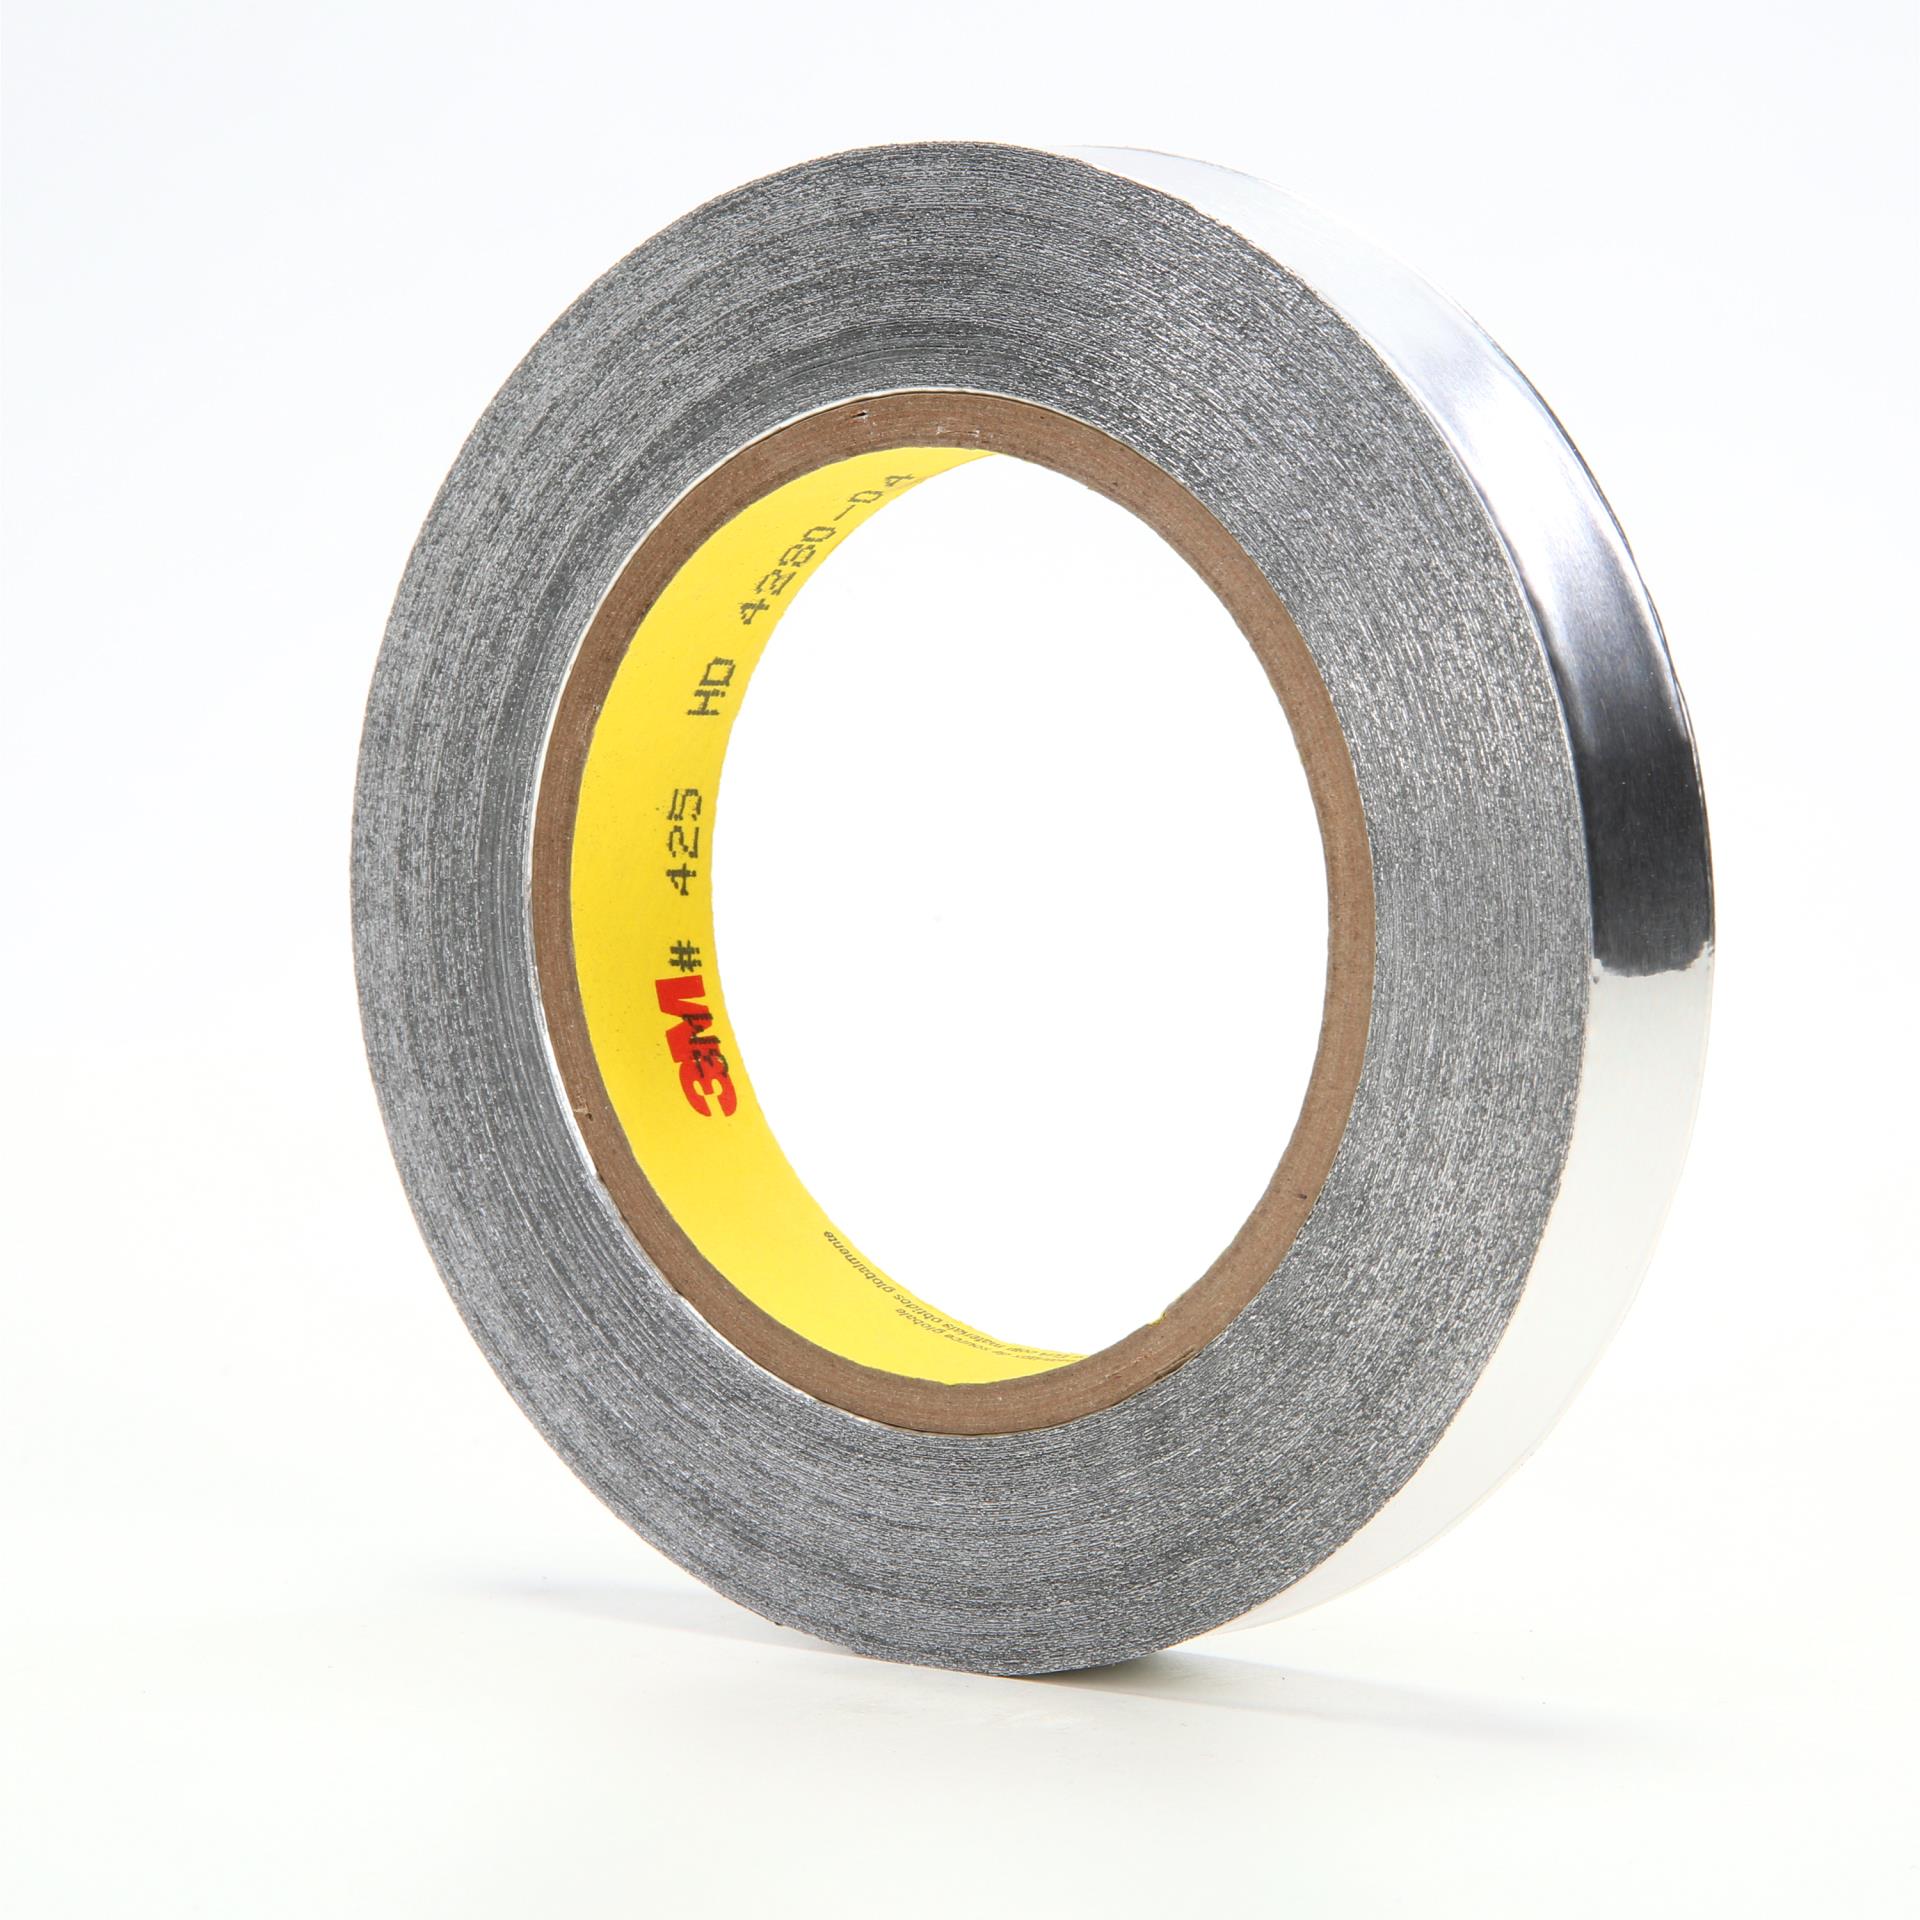 400 degrees F 0.375 width 0.375 length Pack of 2000 3M 8902 CIRCLE-0.375-2000 Blue Polyester/Silicone Adhesive Tape Circles 3M 8902 CIRCLE-0.375-2000 Pack of 2000 0.375 length 0.375 width 